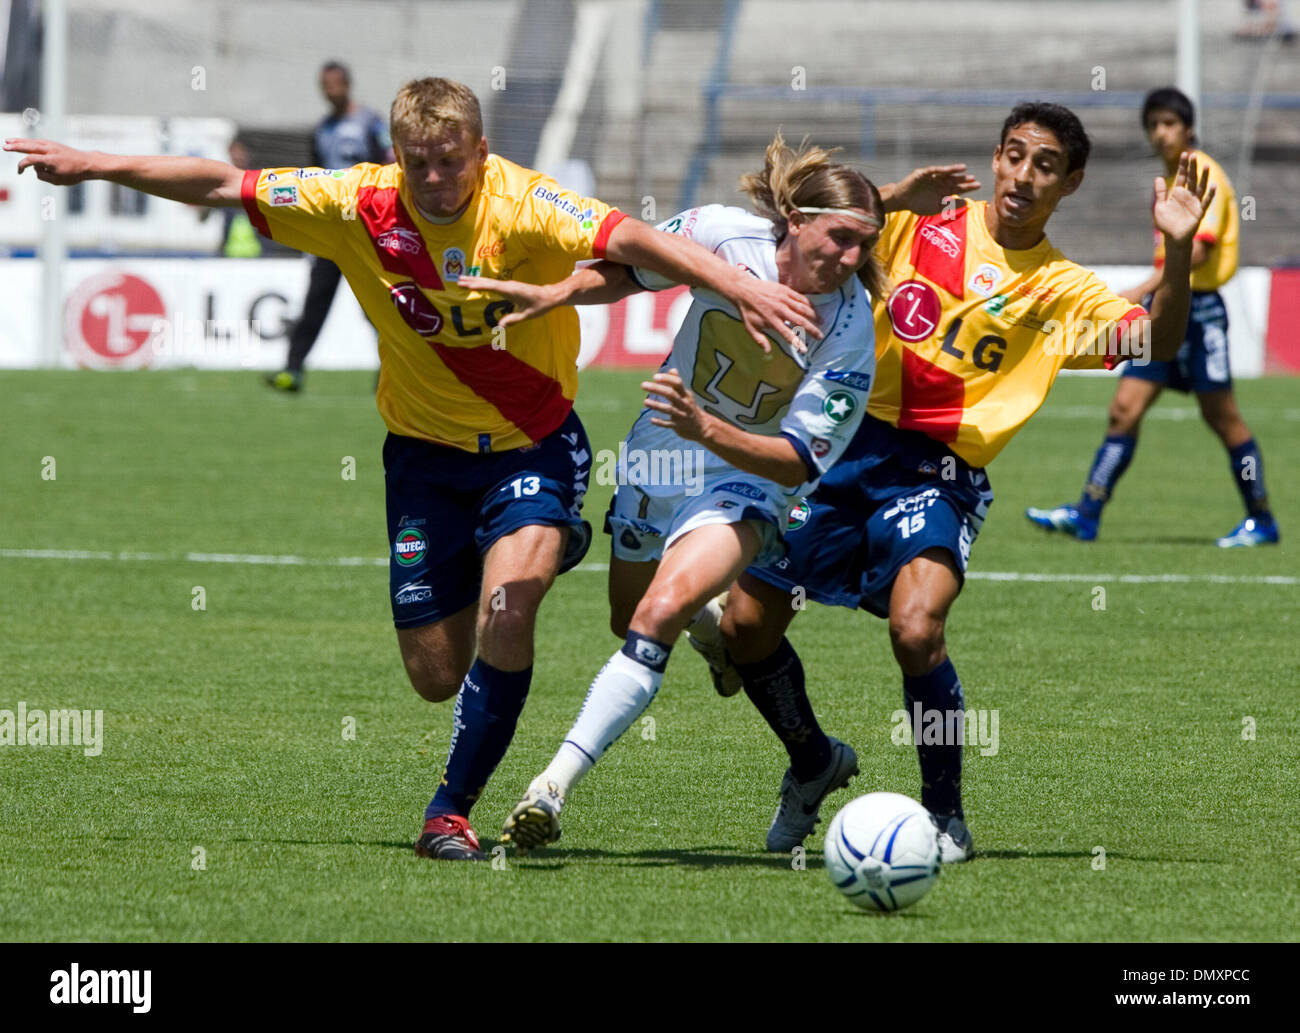 Mar 12, 2006; Mexico City, MEXICO; UNAM Pumas' midfielder Leandro Augusto  (C) fights for the ball with Morelia Monarcas' Cristian Nasuti (L) and  Fernando Arce (R) during the soccer match in the